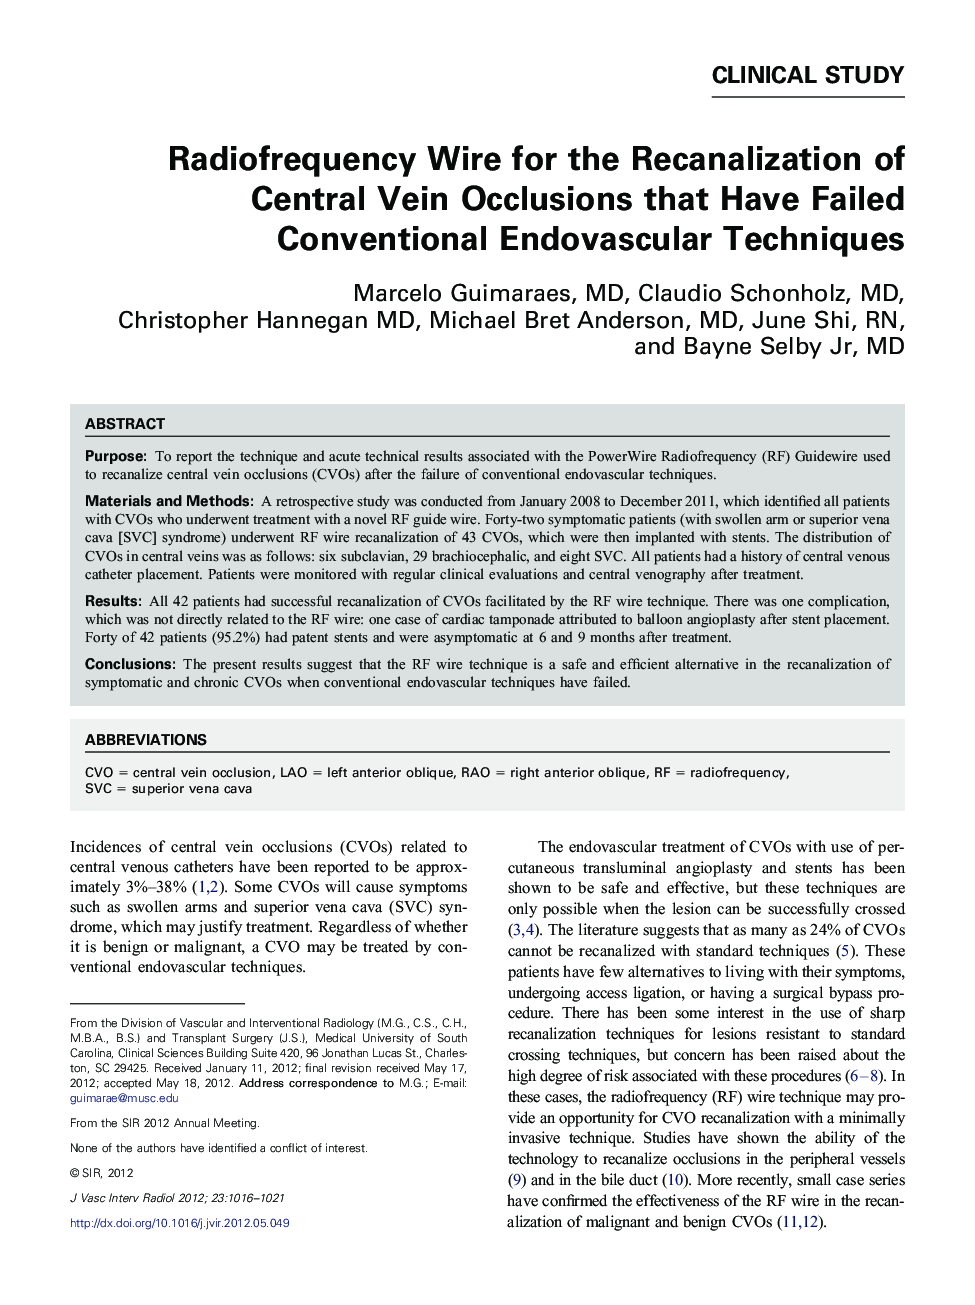 Radiofrequency Wire for the Recanalization of Central Vein Occlusions that Have Failed Conventional Endovascular Techniques